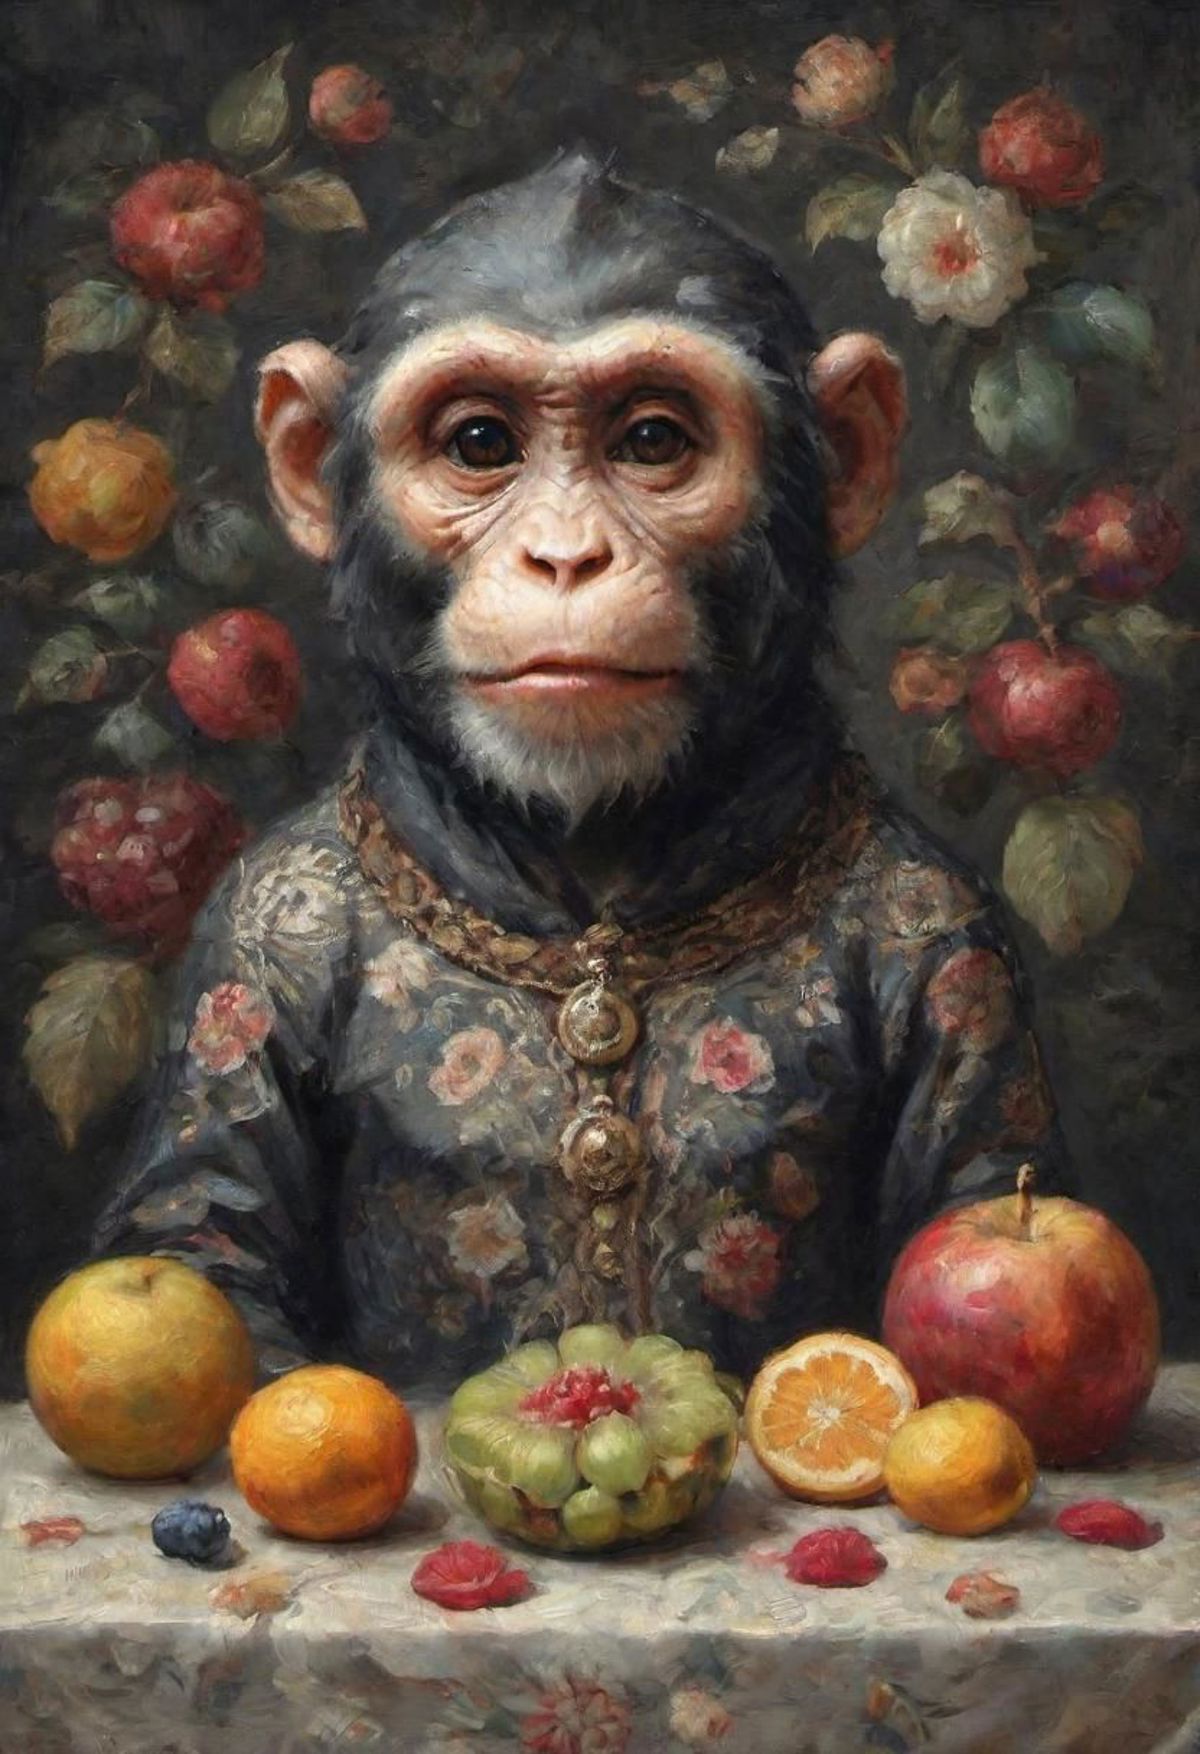 A painting of a monkey dressed in a costume, surrounded by a variety of fruits.